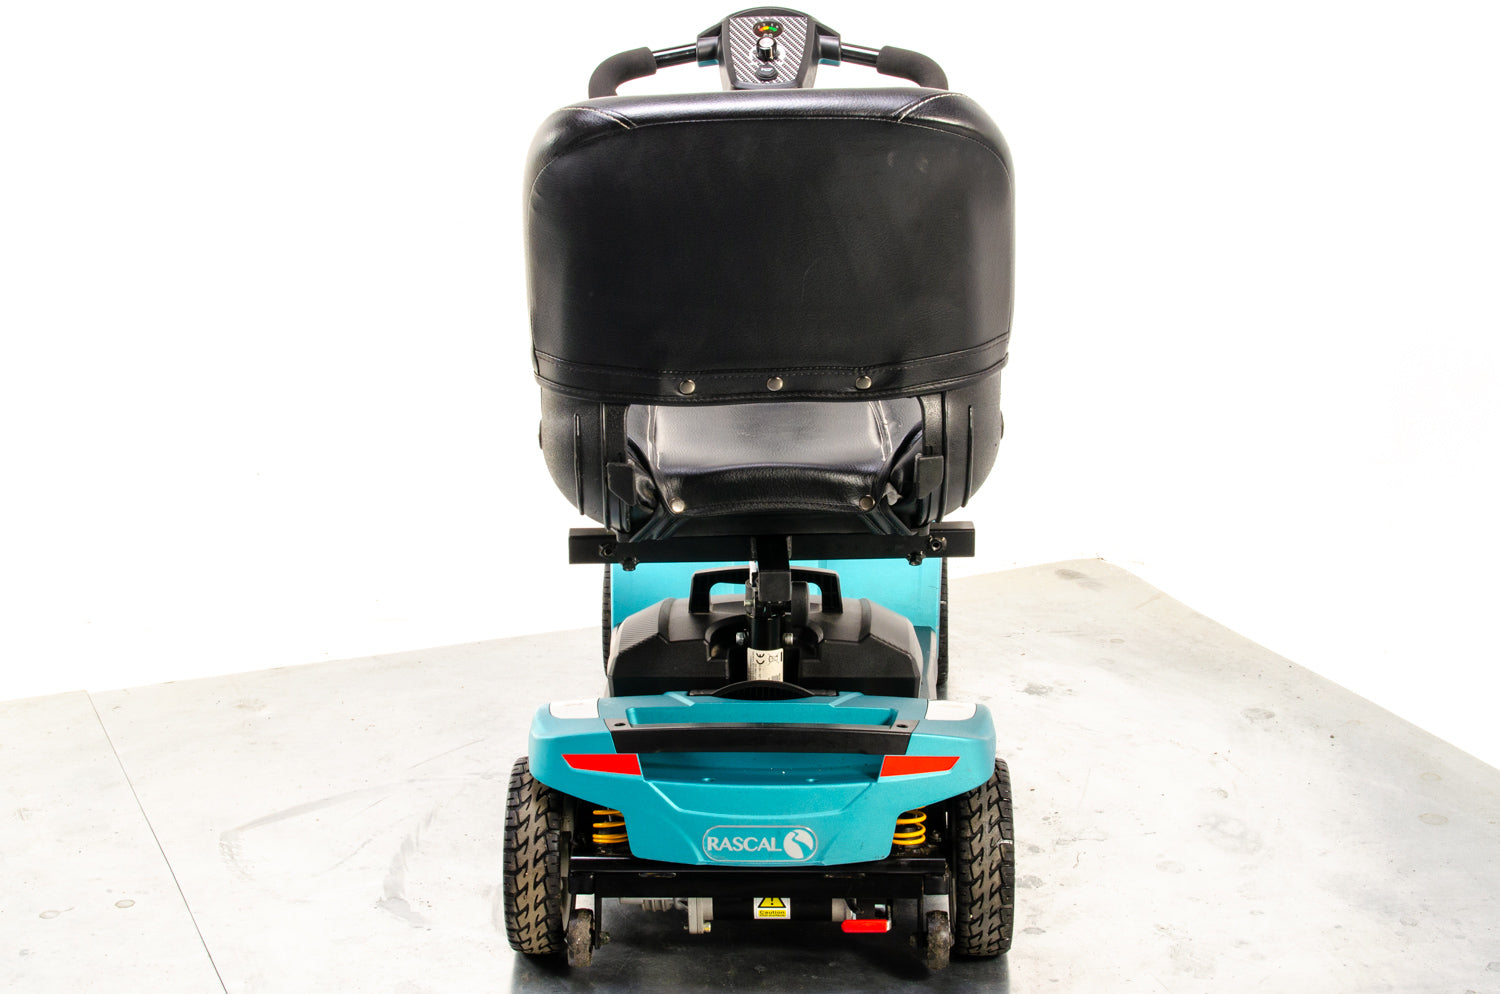 Veo Sport Used Electric Mobility Scooter Small Portable Lightweight Transportable Boot Turquoise